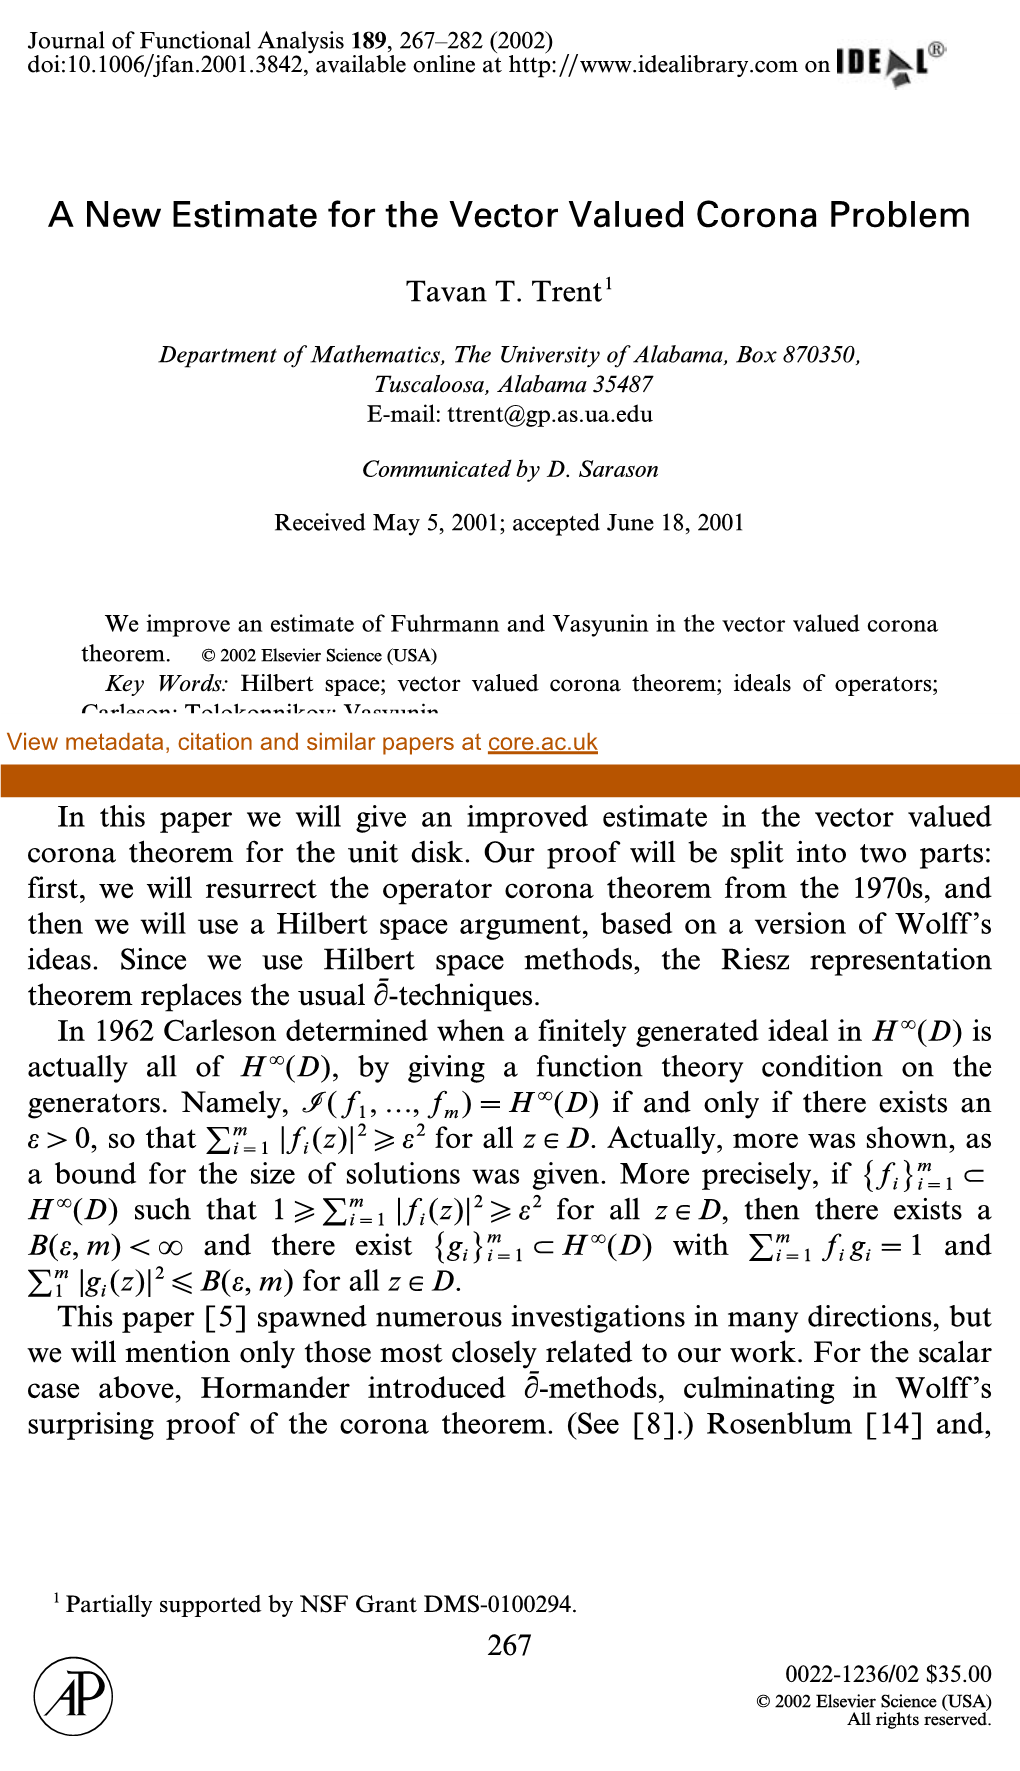 A New Estimate for the Vector Valued Corona Problem